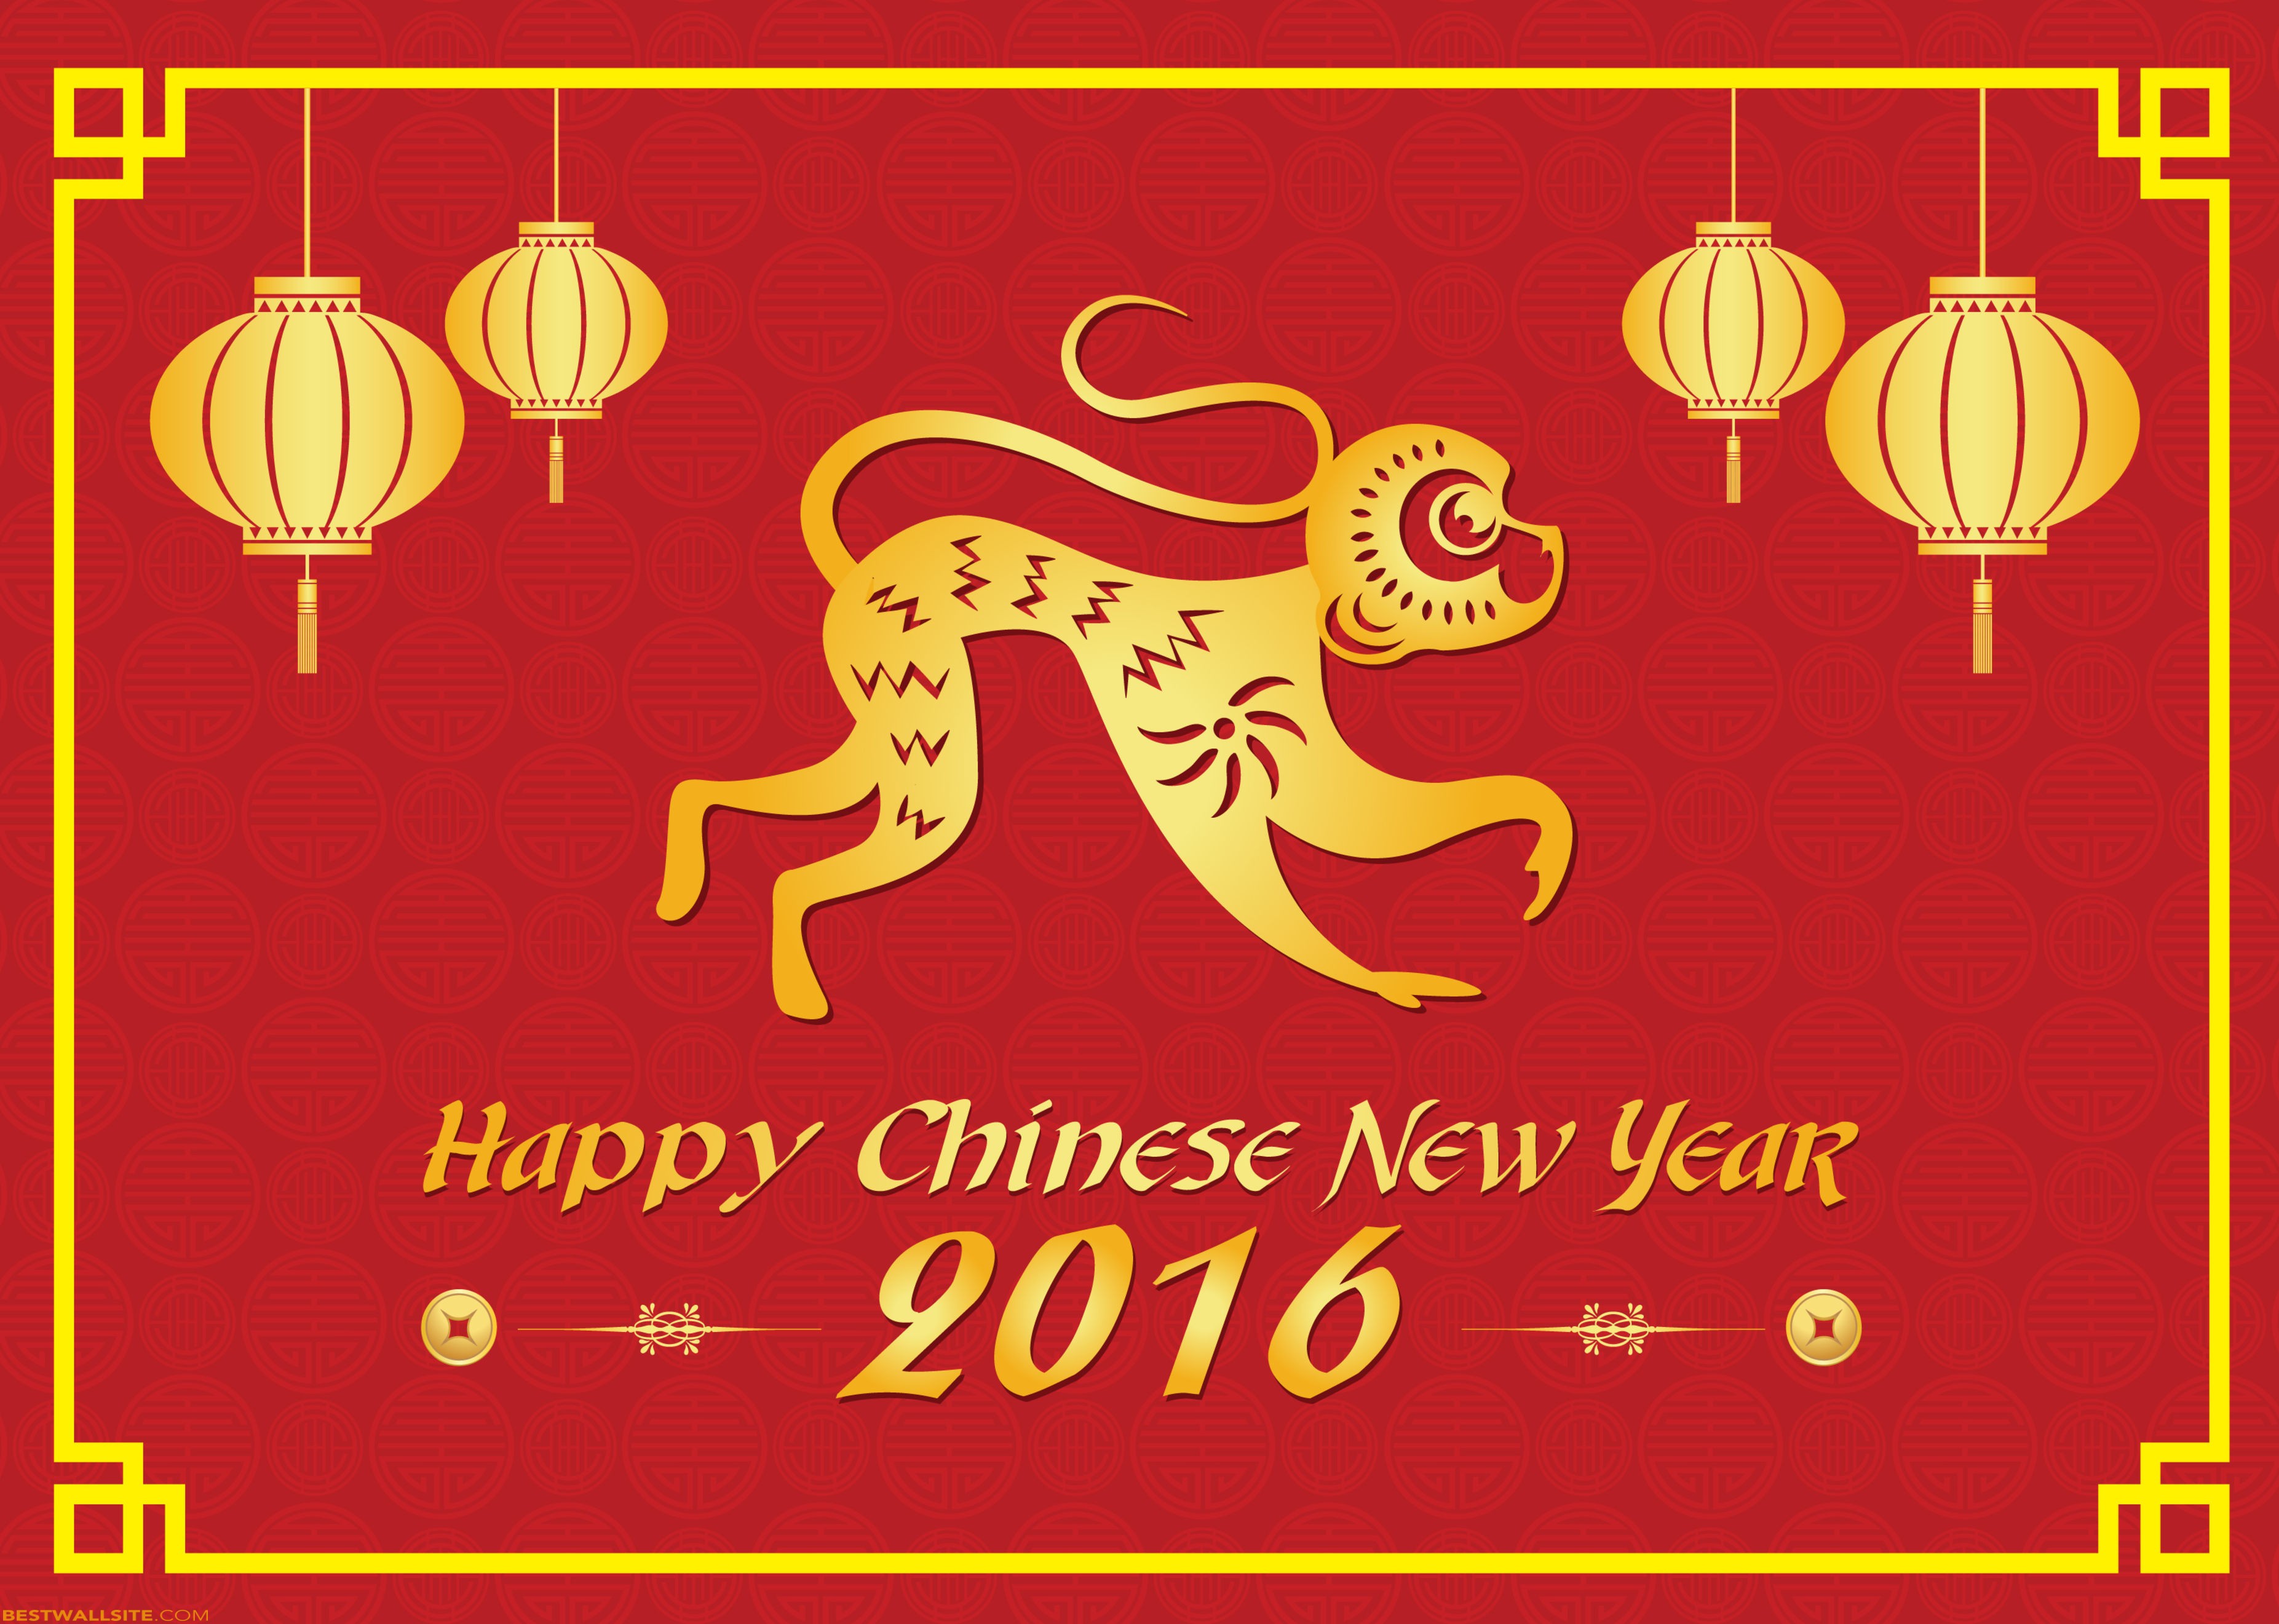 Chinese New Year 2016 Wallpapers Best Wallpapers